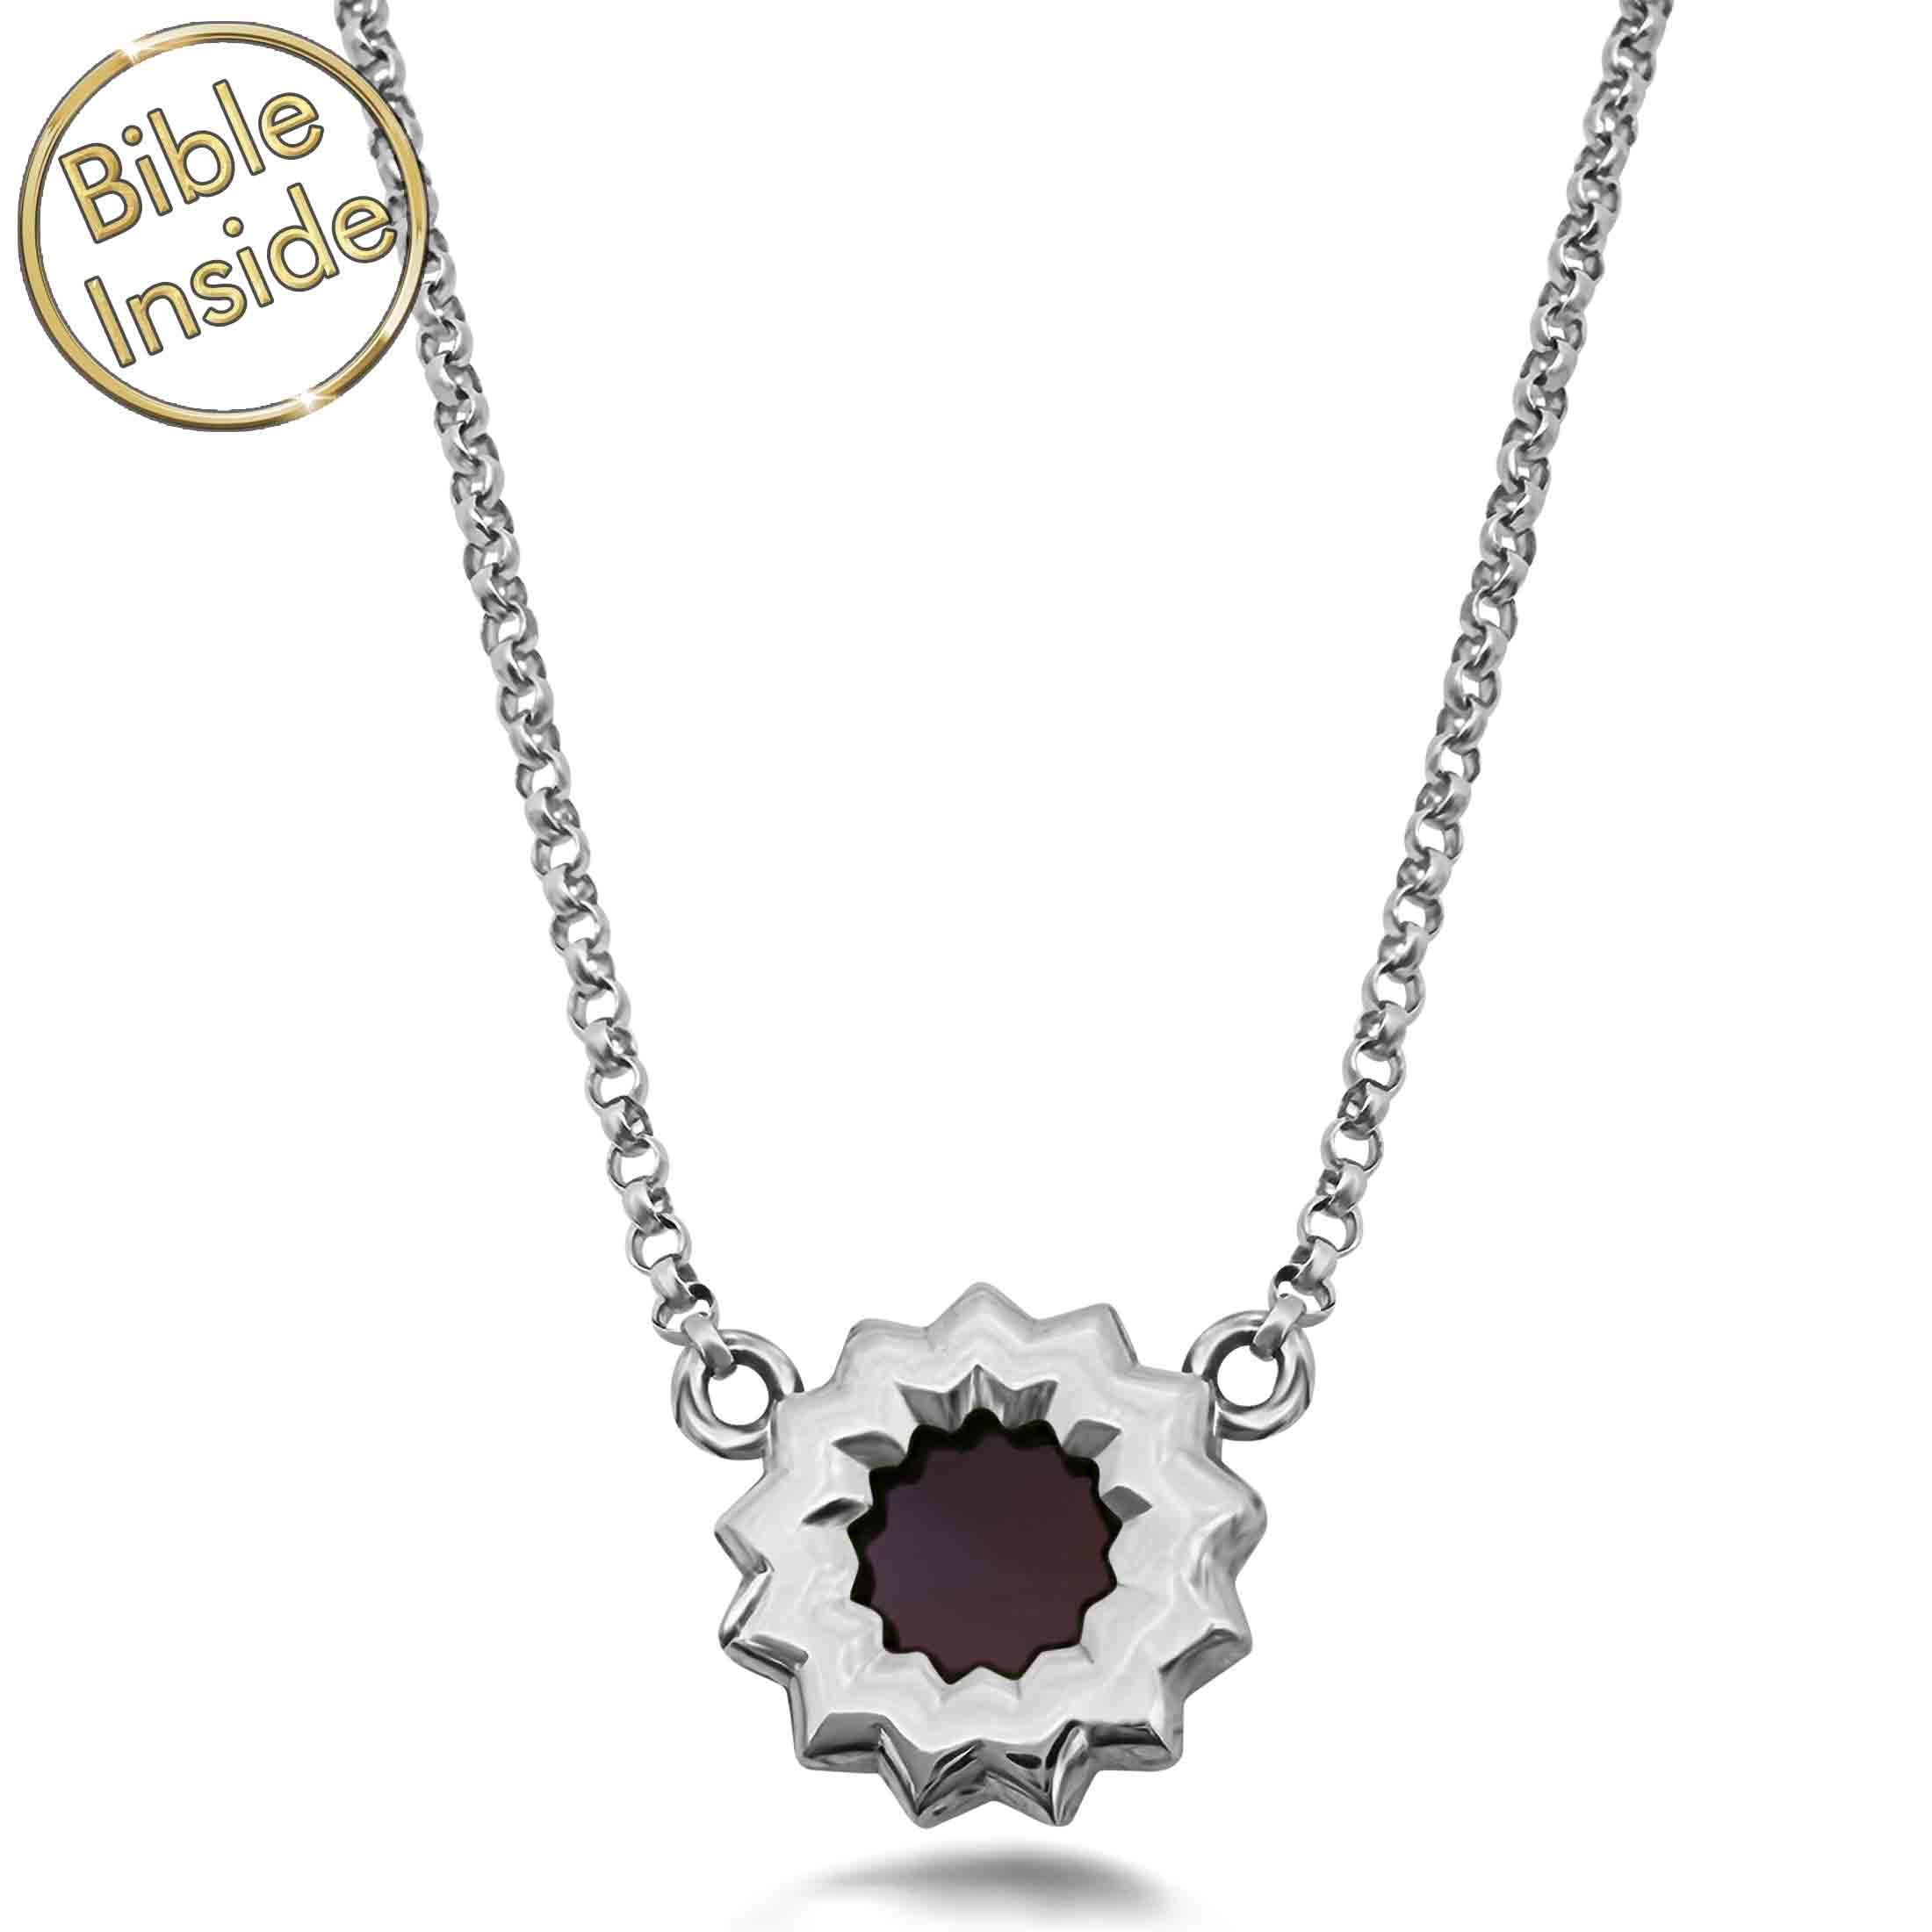 Nano ‘Bible Inside’ Sterling Silver ‘Flower of Love’ Necklace – Made in Israel